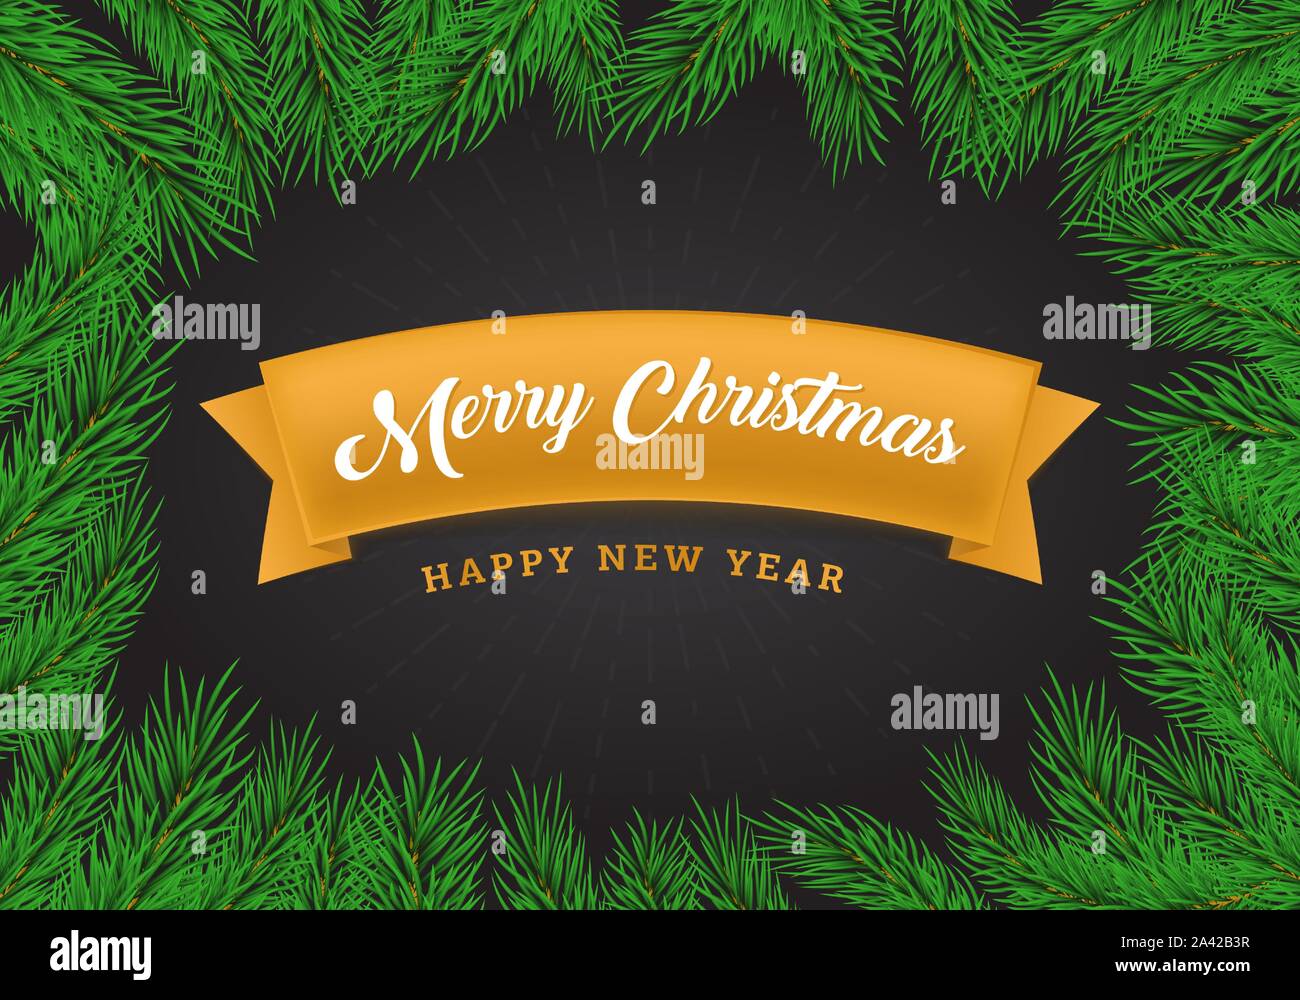 Christmas greetings flat banner template. Yellow ribbon with calligraphy inscription on black background. Winter holidays postcard design layout with realistic fir tree branches frame Stock Vector